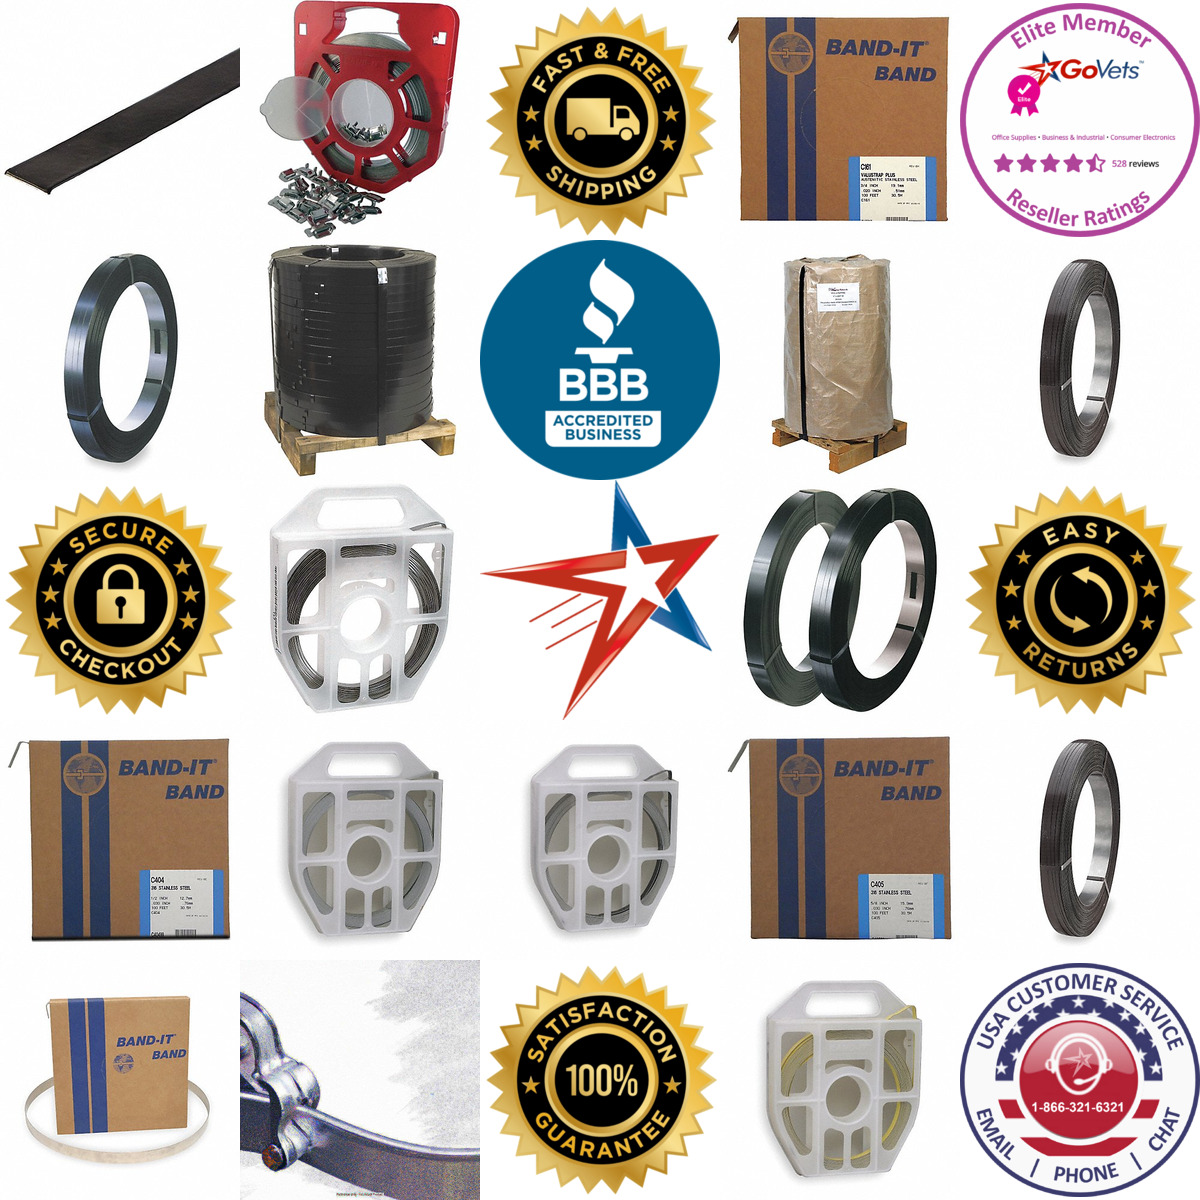 A selection of Steel Strapping products on GoVets